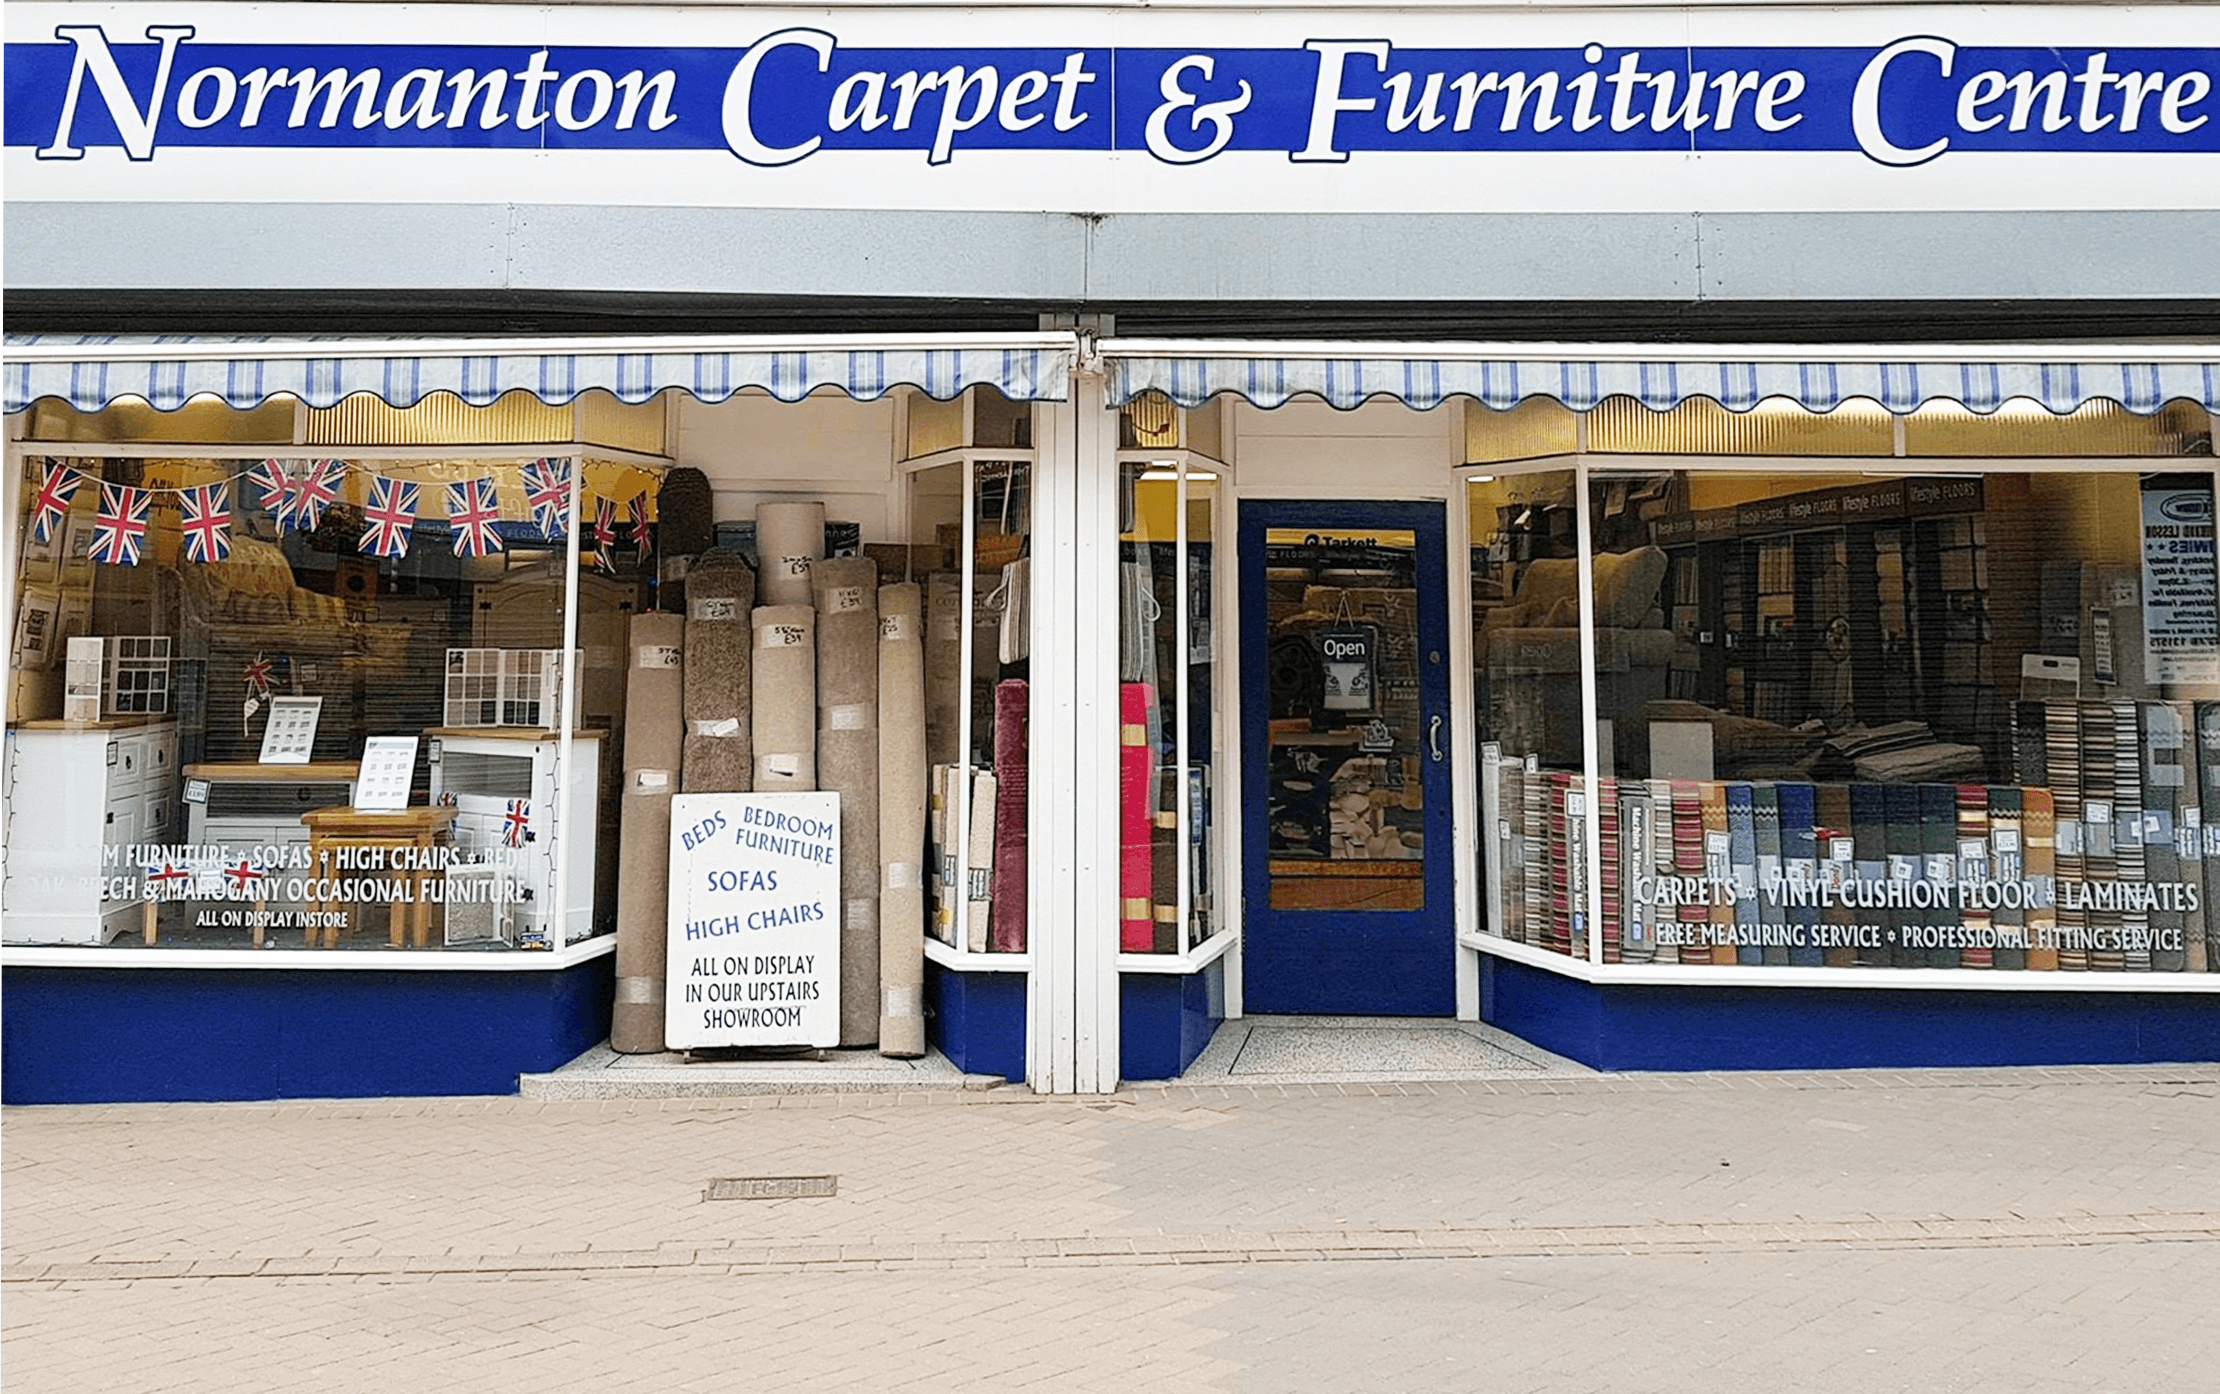 Image of the Normanton Carpet and Furniture Centre showroom on the Normanton High Street